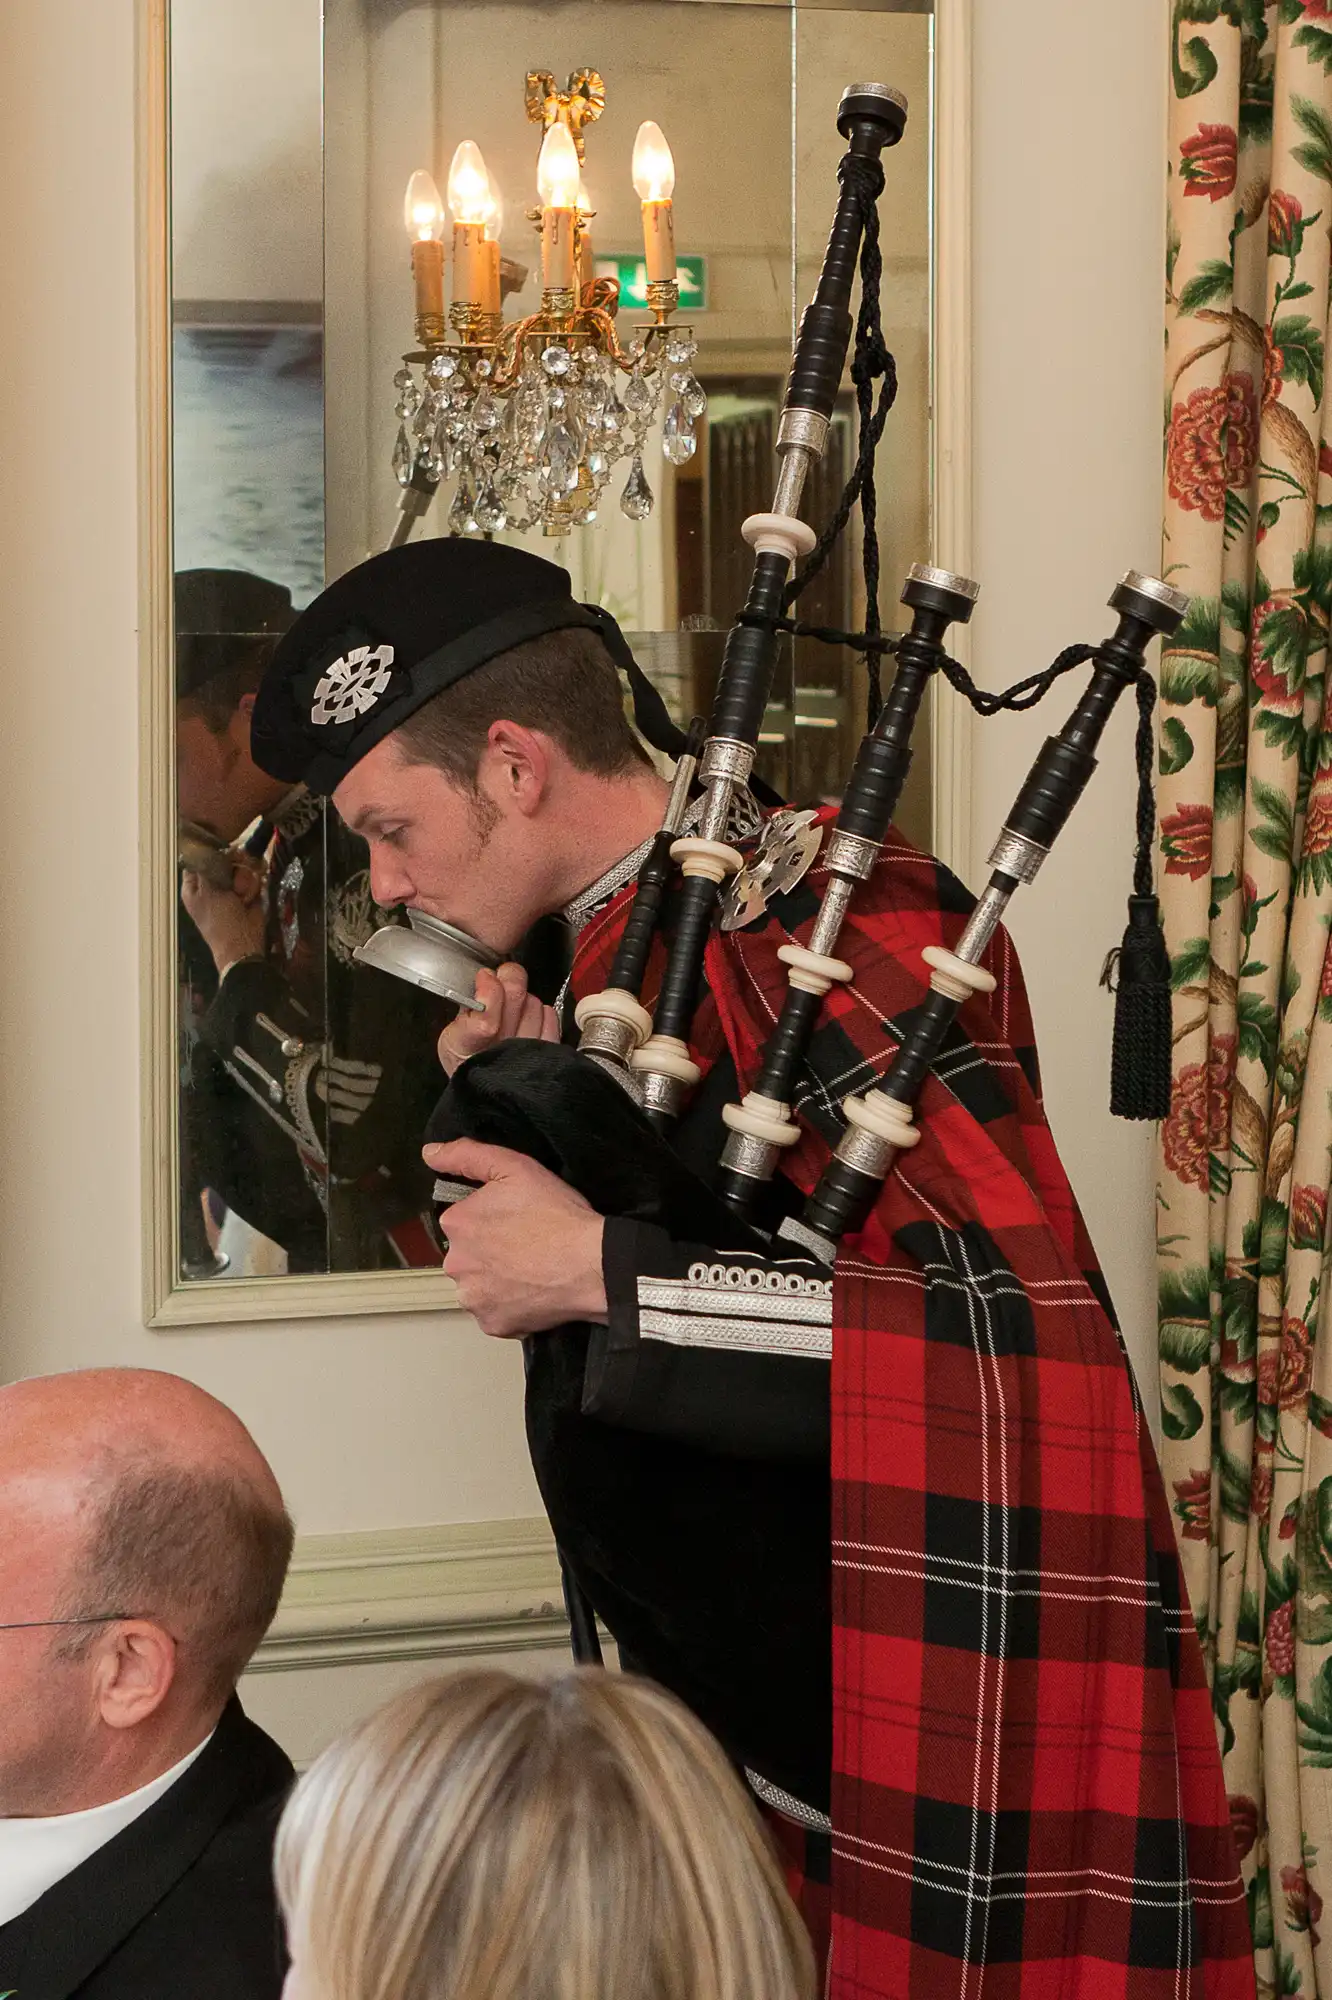 A man in traditional scottish attire plays the bagpipes indoors at a formal event, standing next to seated guests.